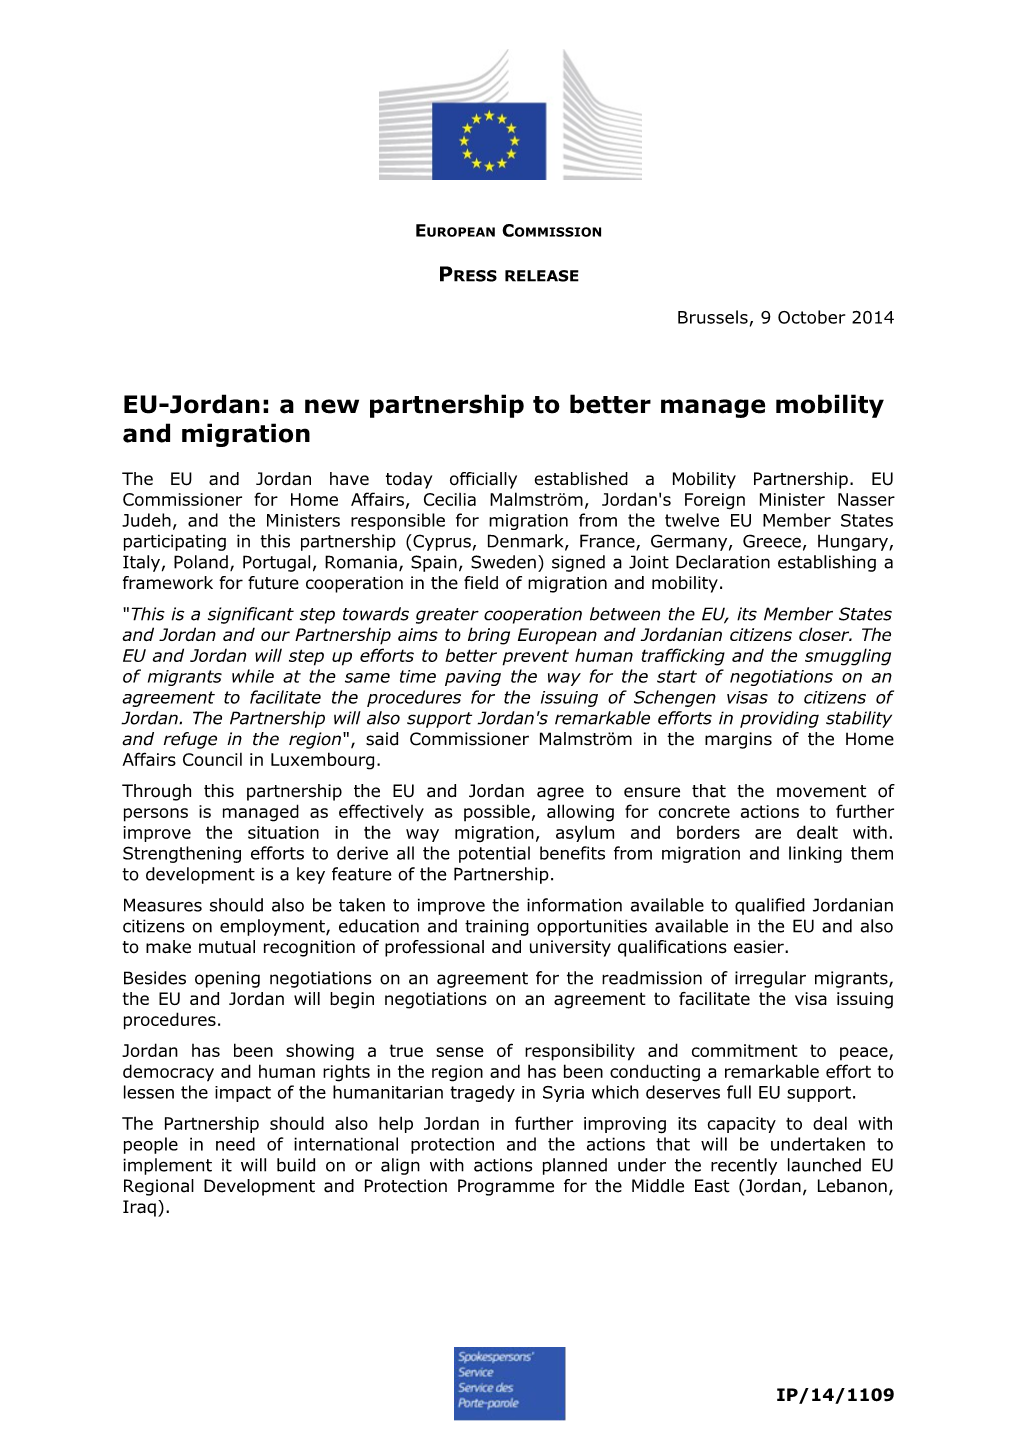 EU-Jordan: a New Partnership to Better Manage Mobility and Migration